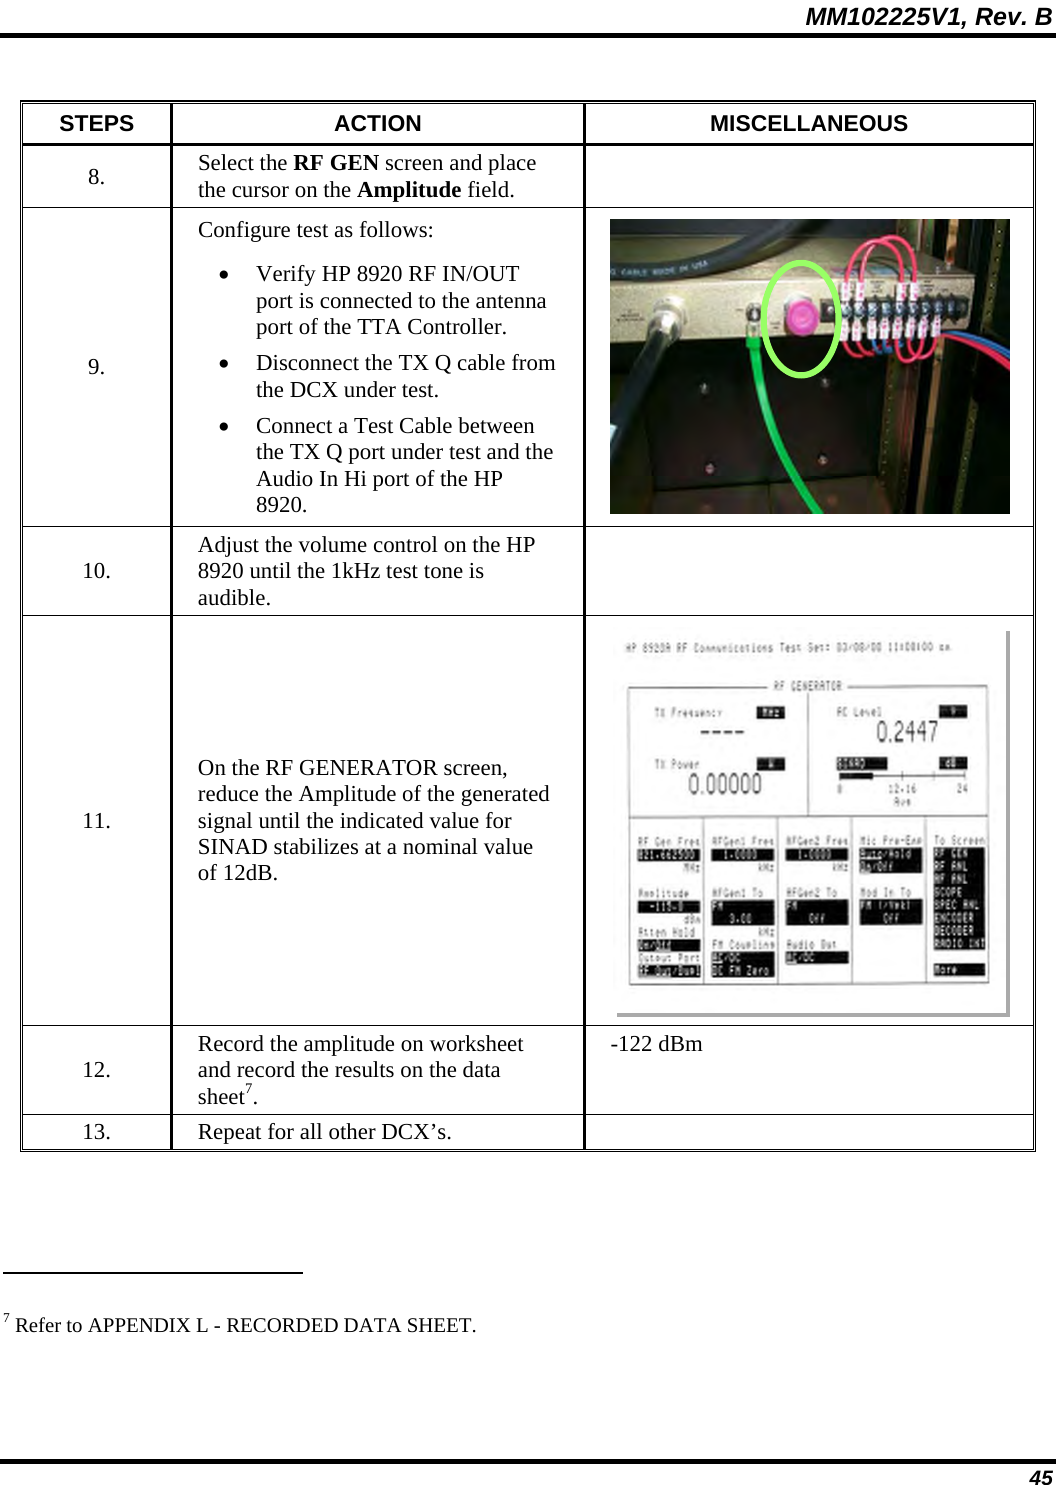   MM102225V1, Rev. B   45 STEPS ACTION  MISCELLANEOUS 8.  Select the RF GEN screen and place the cursor on the Amplitude field.   9. Configure test as follows: • Verify HP 8920 RF IN/OUT port is connected to the antenna port of the TTA Controller. • Disconnect the TX Q cable from the DCX under test. • Connect a Test Cable between the TX Q port under test and the Audio In Hi port of the HP 8920.   10.  Adjust the volume control on the HP 8920 until the 1kHz test tone is audible.  11. On the RF GENERATOR screen, reduce the Amplitude of the generated signal until the indicated value for SINAD stabilizes at a nominal value of 12dB.  12.  Record the amplitude on worksheet and record the results on the data sheet7. -122 dBm 13.  Repeat for all other DCX’s.                                                               7 Refer to APPENDIX L - RECORDED DATA SHEET. 